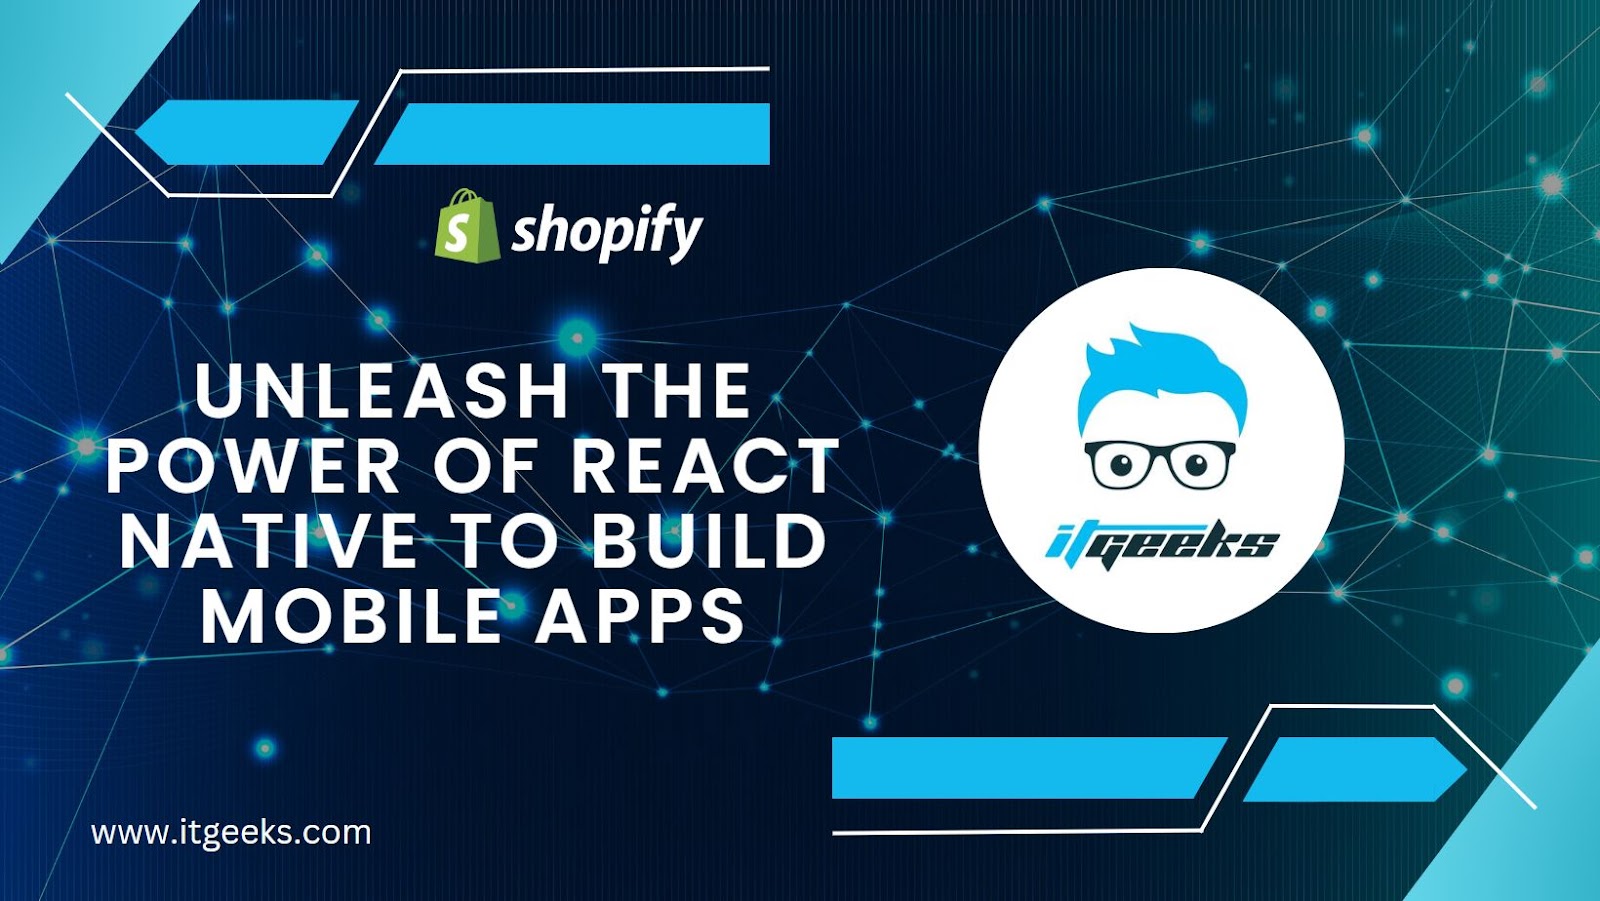 Unleash the Power of React Native to Build Mobile Apps